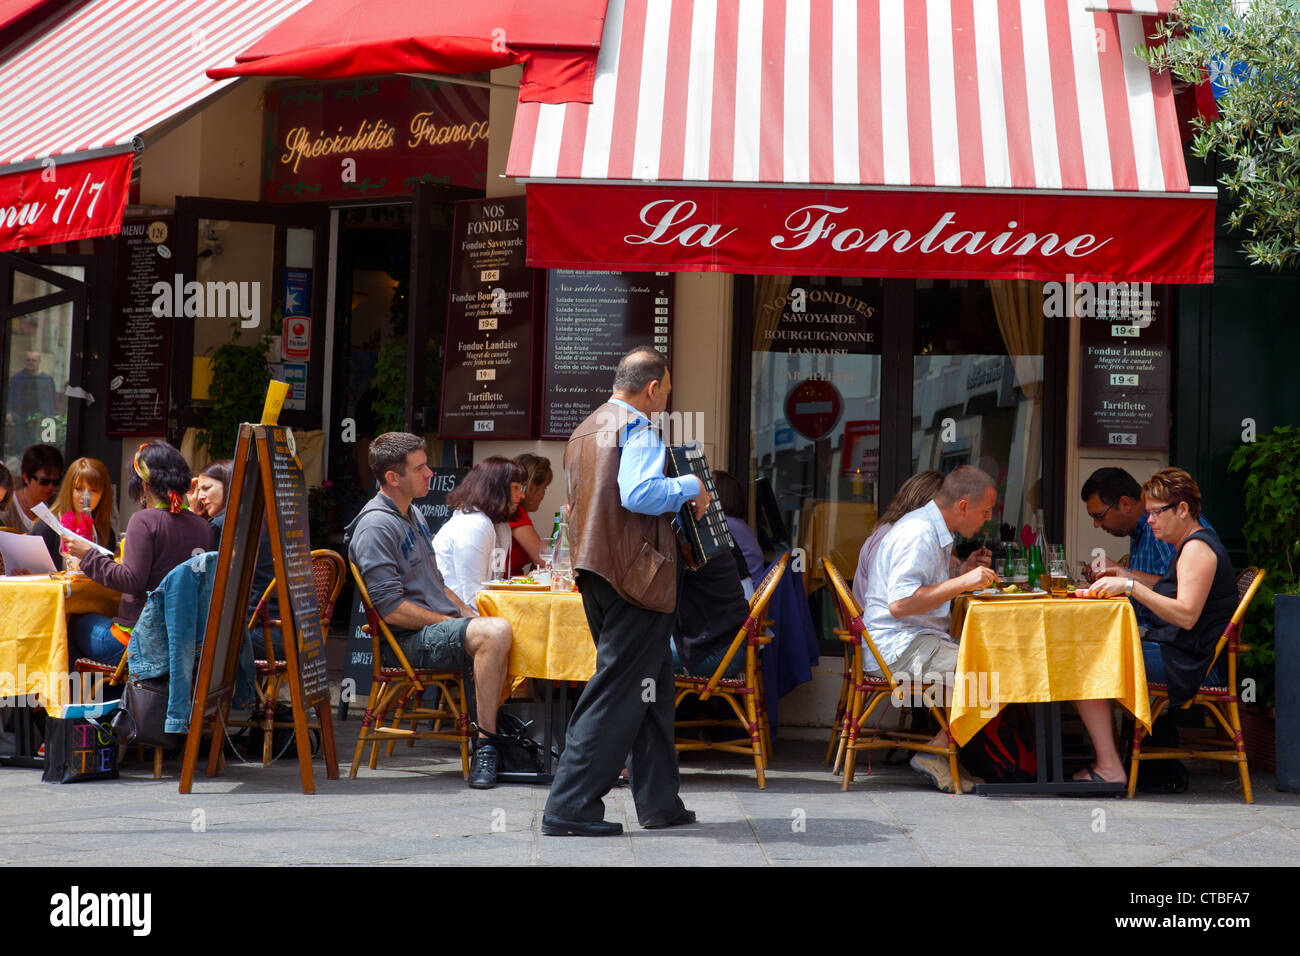 Cafes line rue Mouffetard on the Left Bank of Paris France Stock Photo